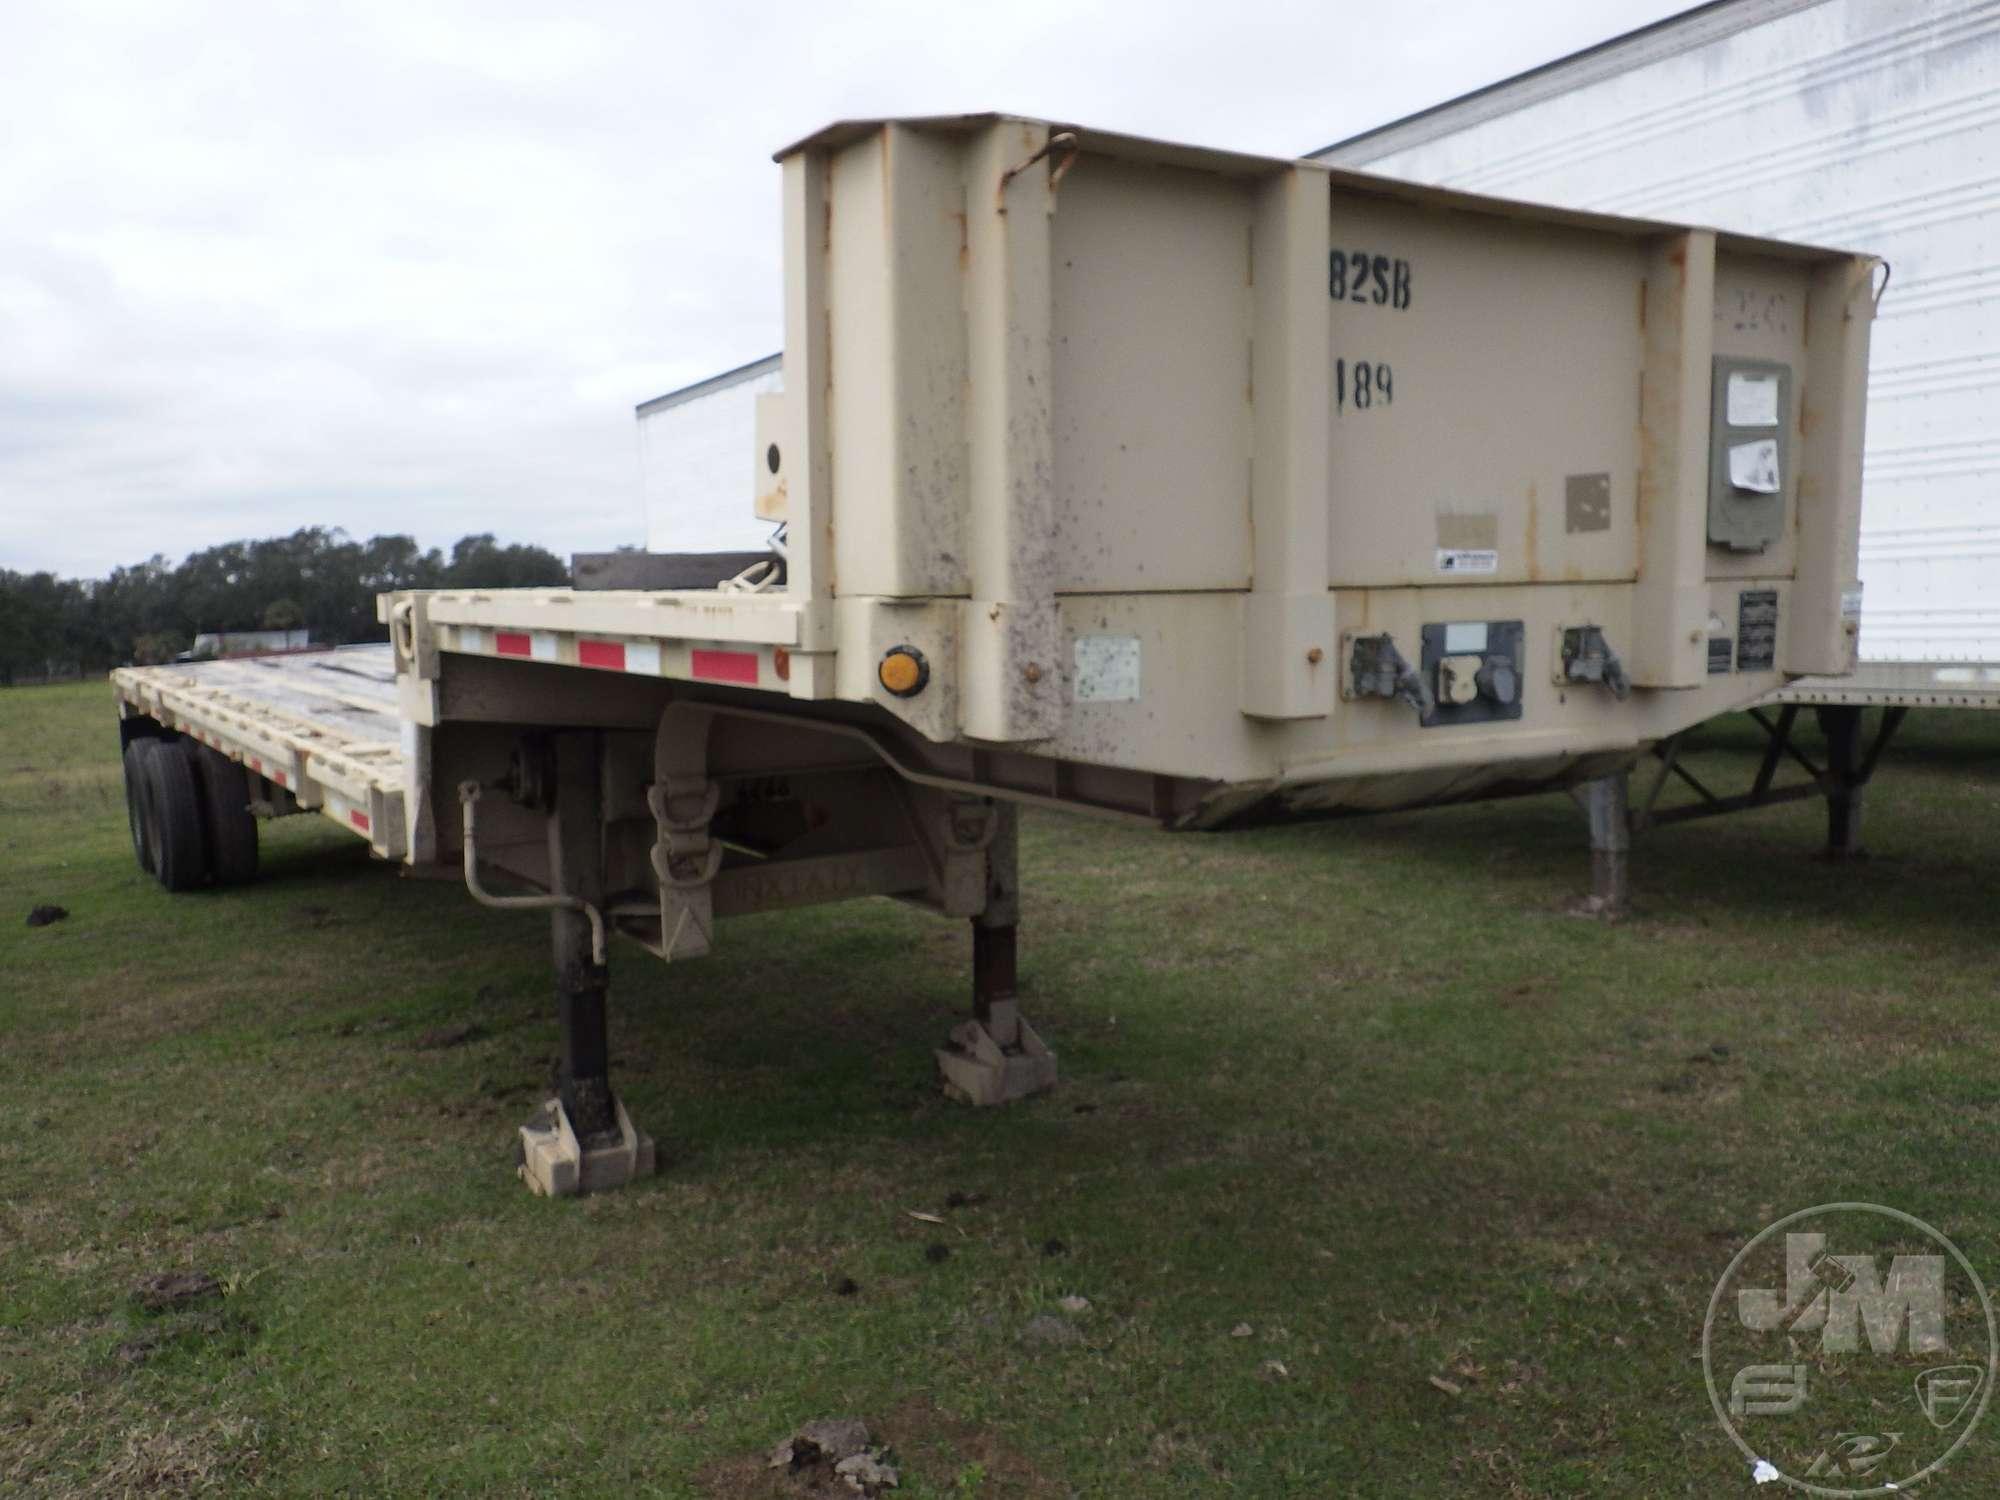 2009 FONTAINE TRAILER CO. M871A3 NX1A7Y 32'X96" STEEL STEPDECK TRAILER VIN: 5SV2412A5A5901833